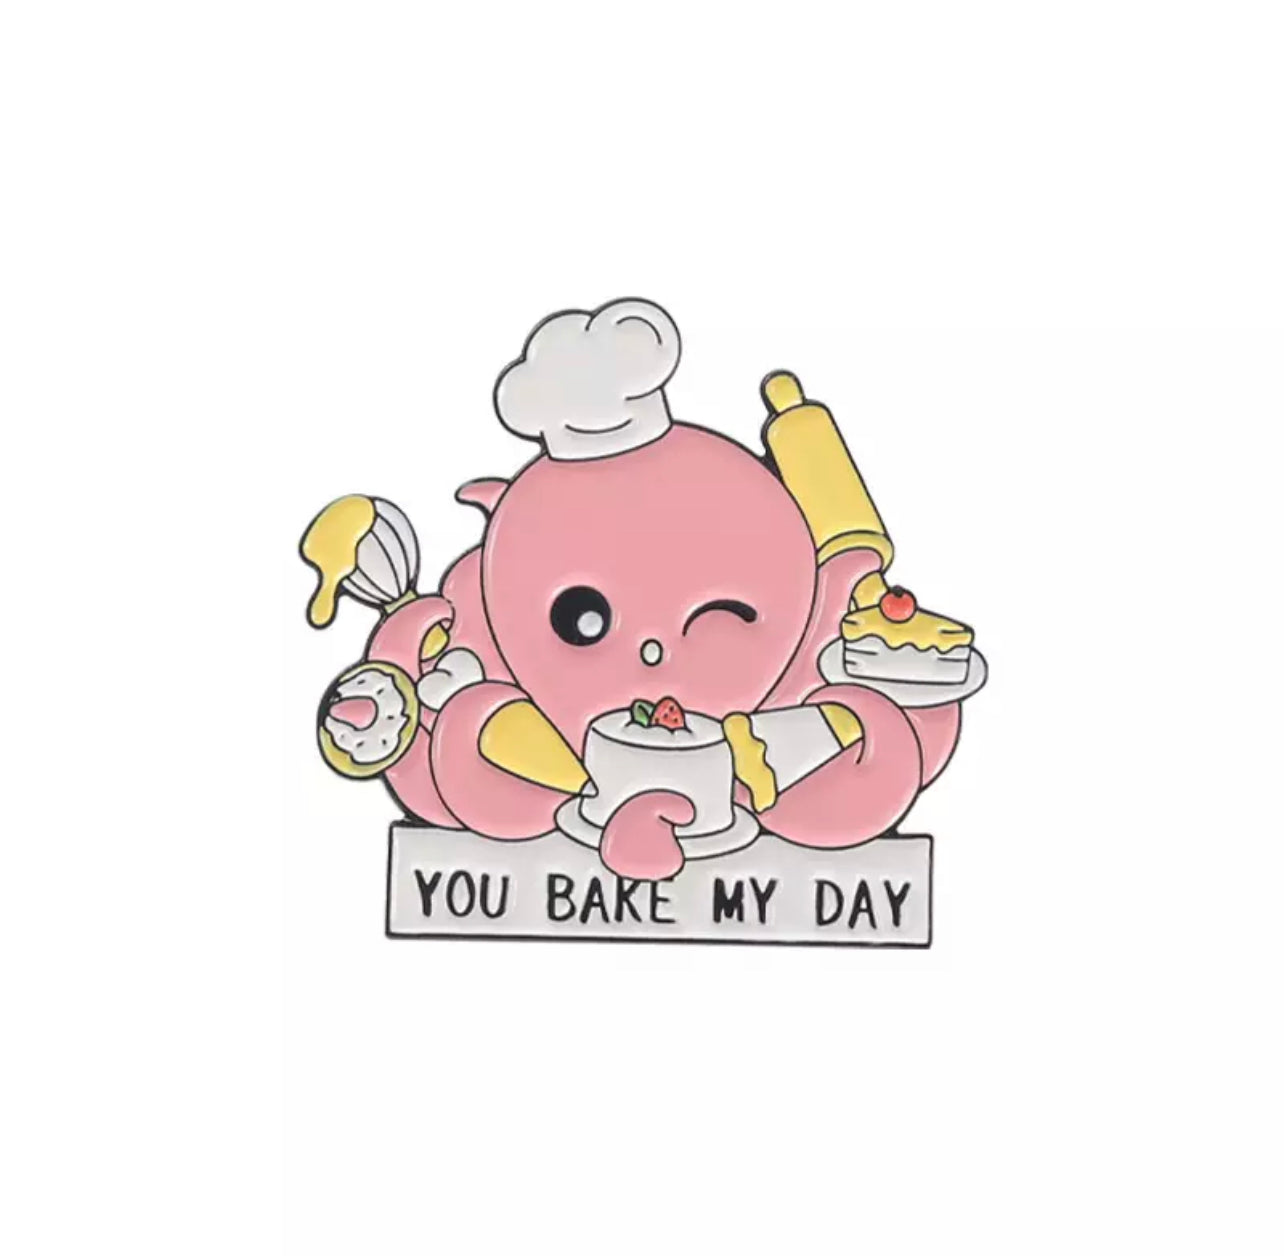 You bake my day